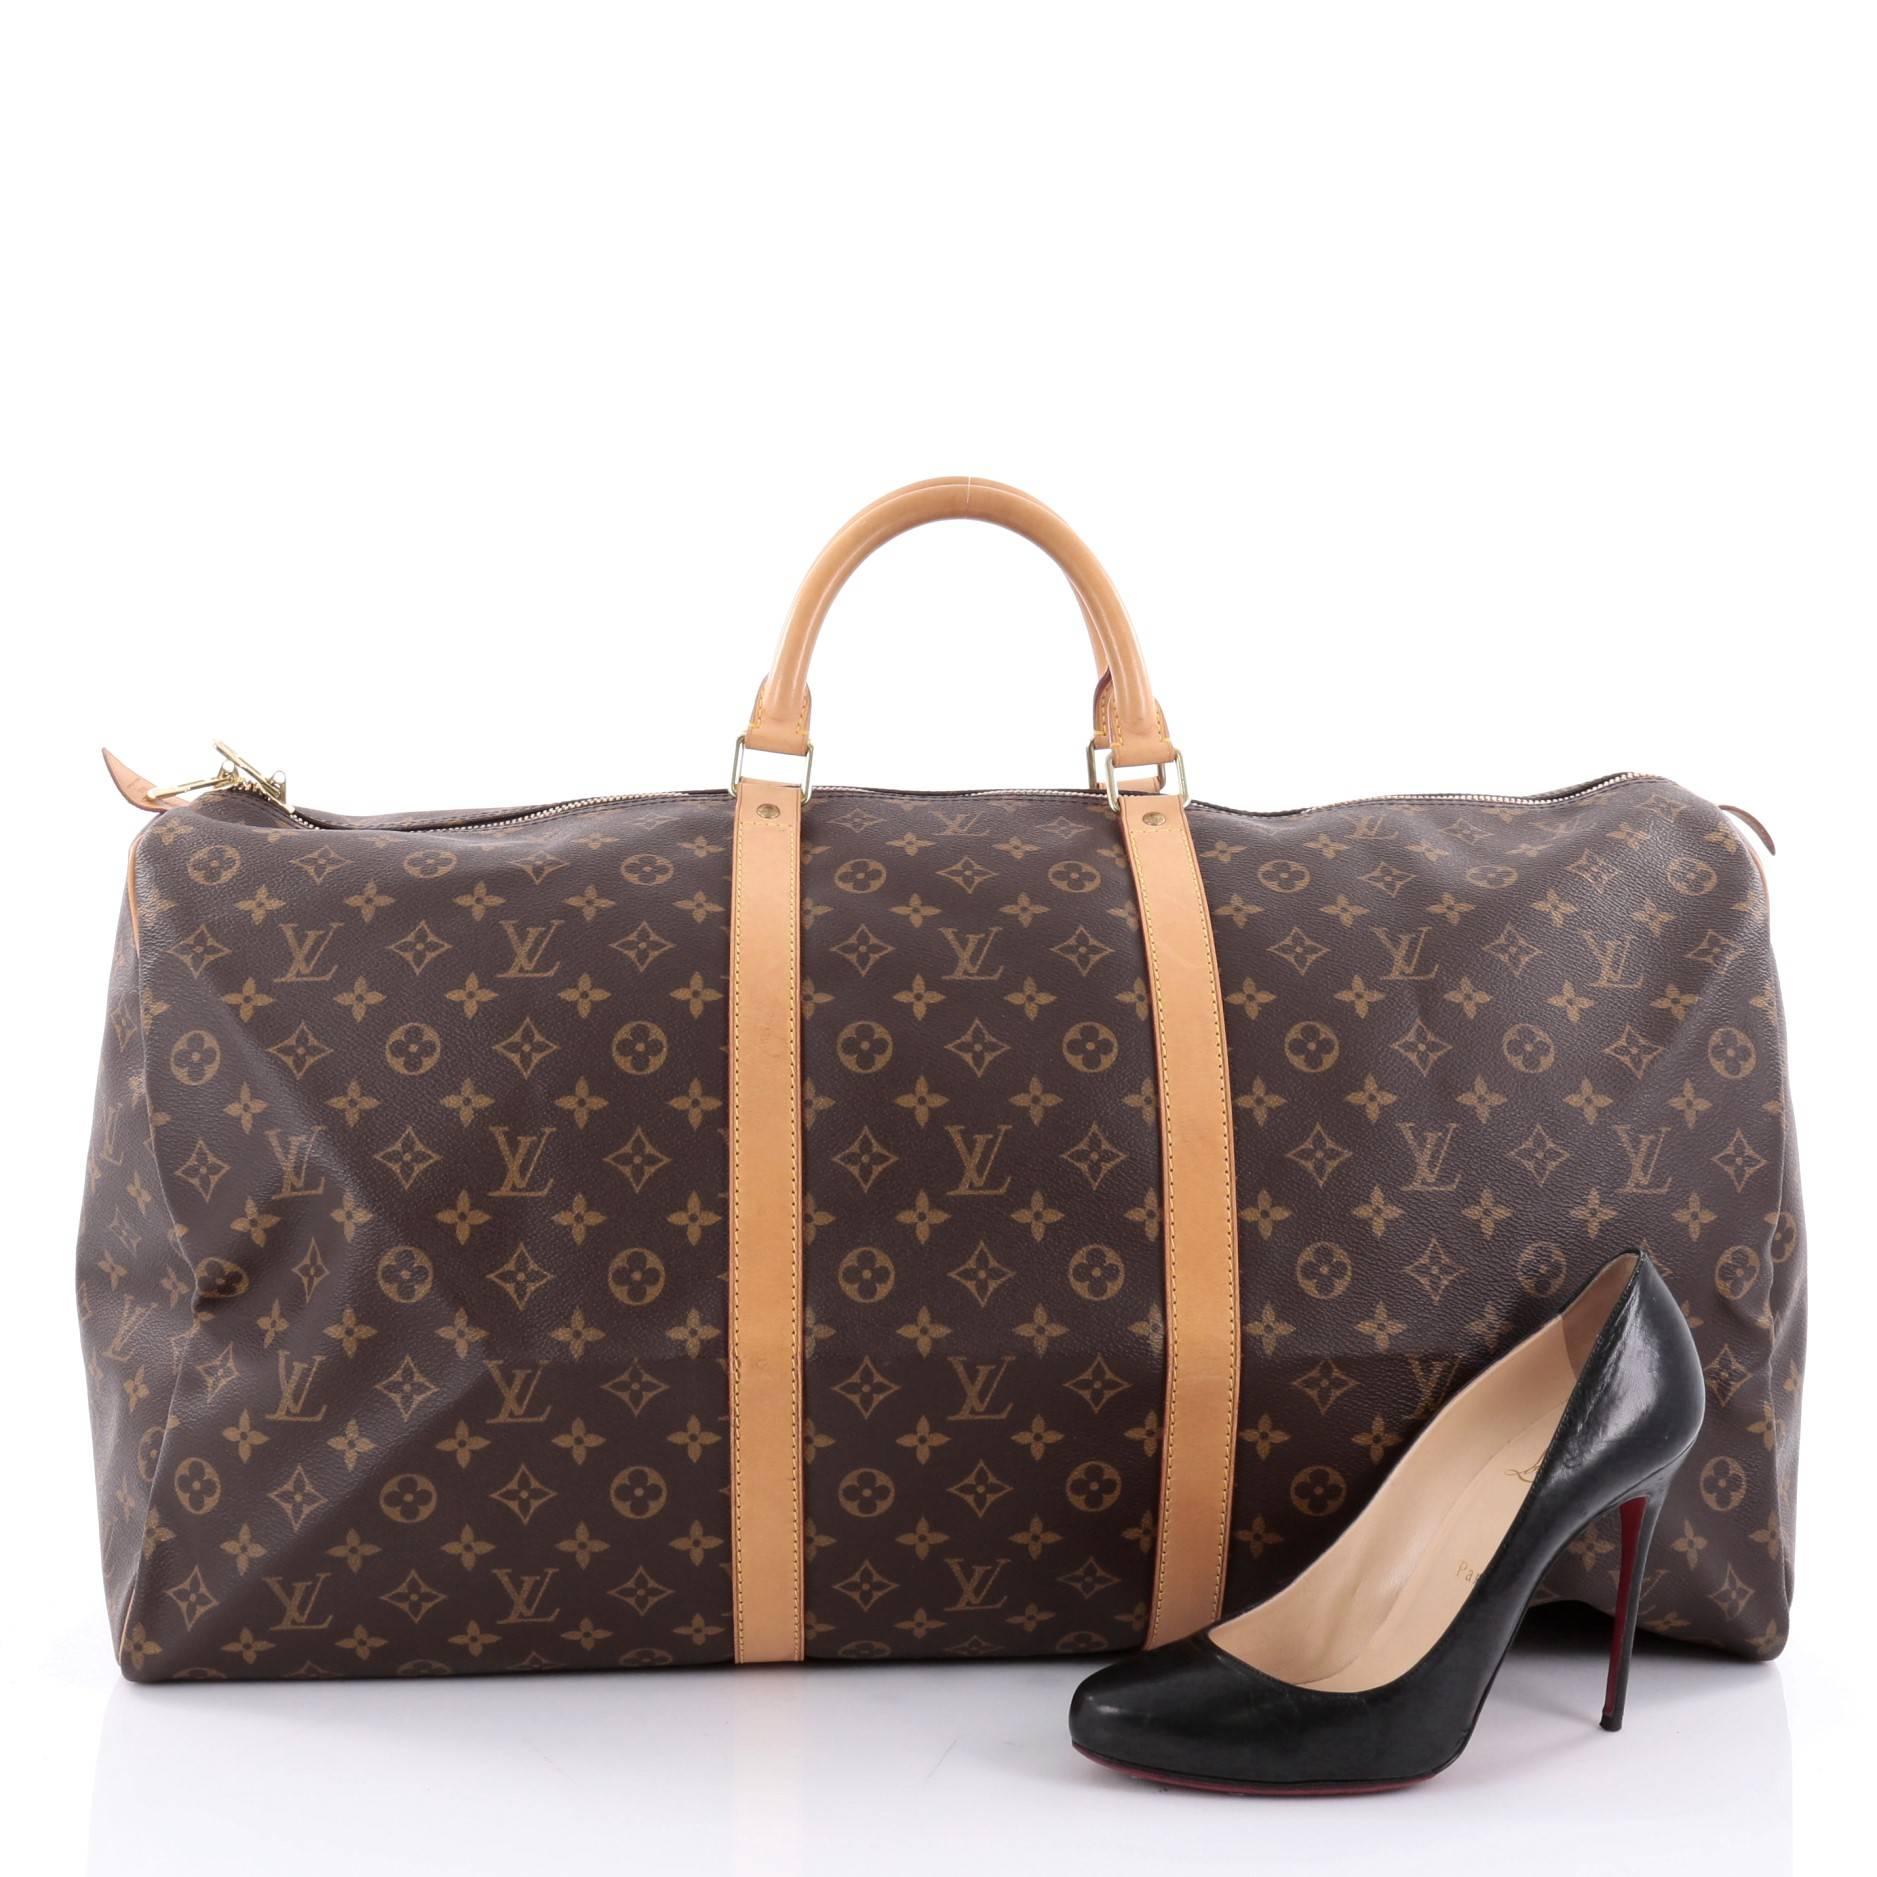 This authentic Louis Vuitton Keepall Bag Monogram Canvas 60 is the perfect purchase for a weekend trip, and can be effortlessly paired with any outfit from casual to formal. Crafted with traditional Louis Vuitton brown monogram coated canvas, this